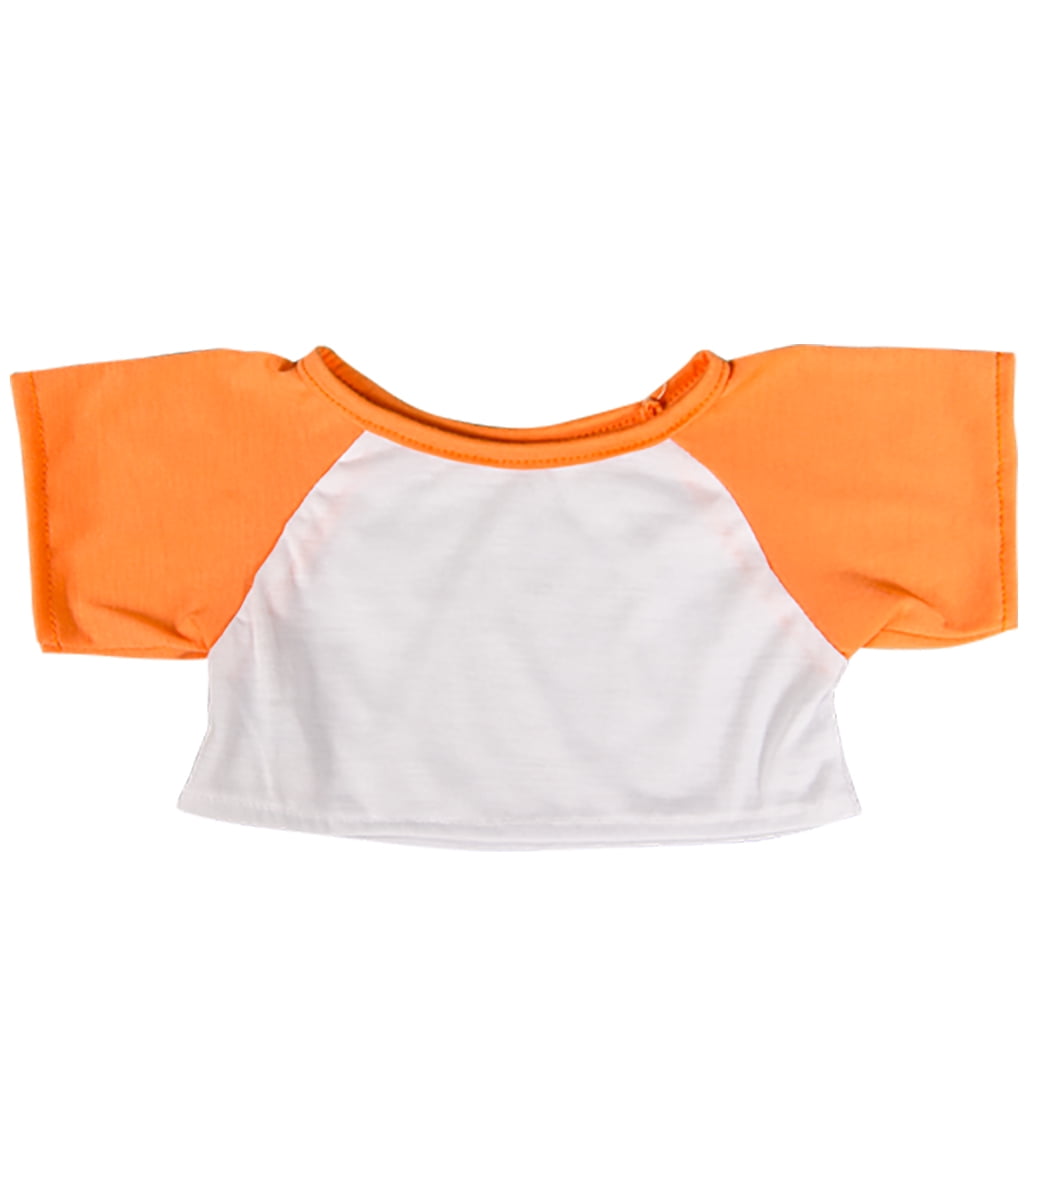 White Tee w/ Orange Sleeves Teddy Bear Clothes Fits Most 14"-18" Build-a-bear an 